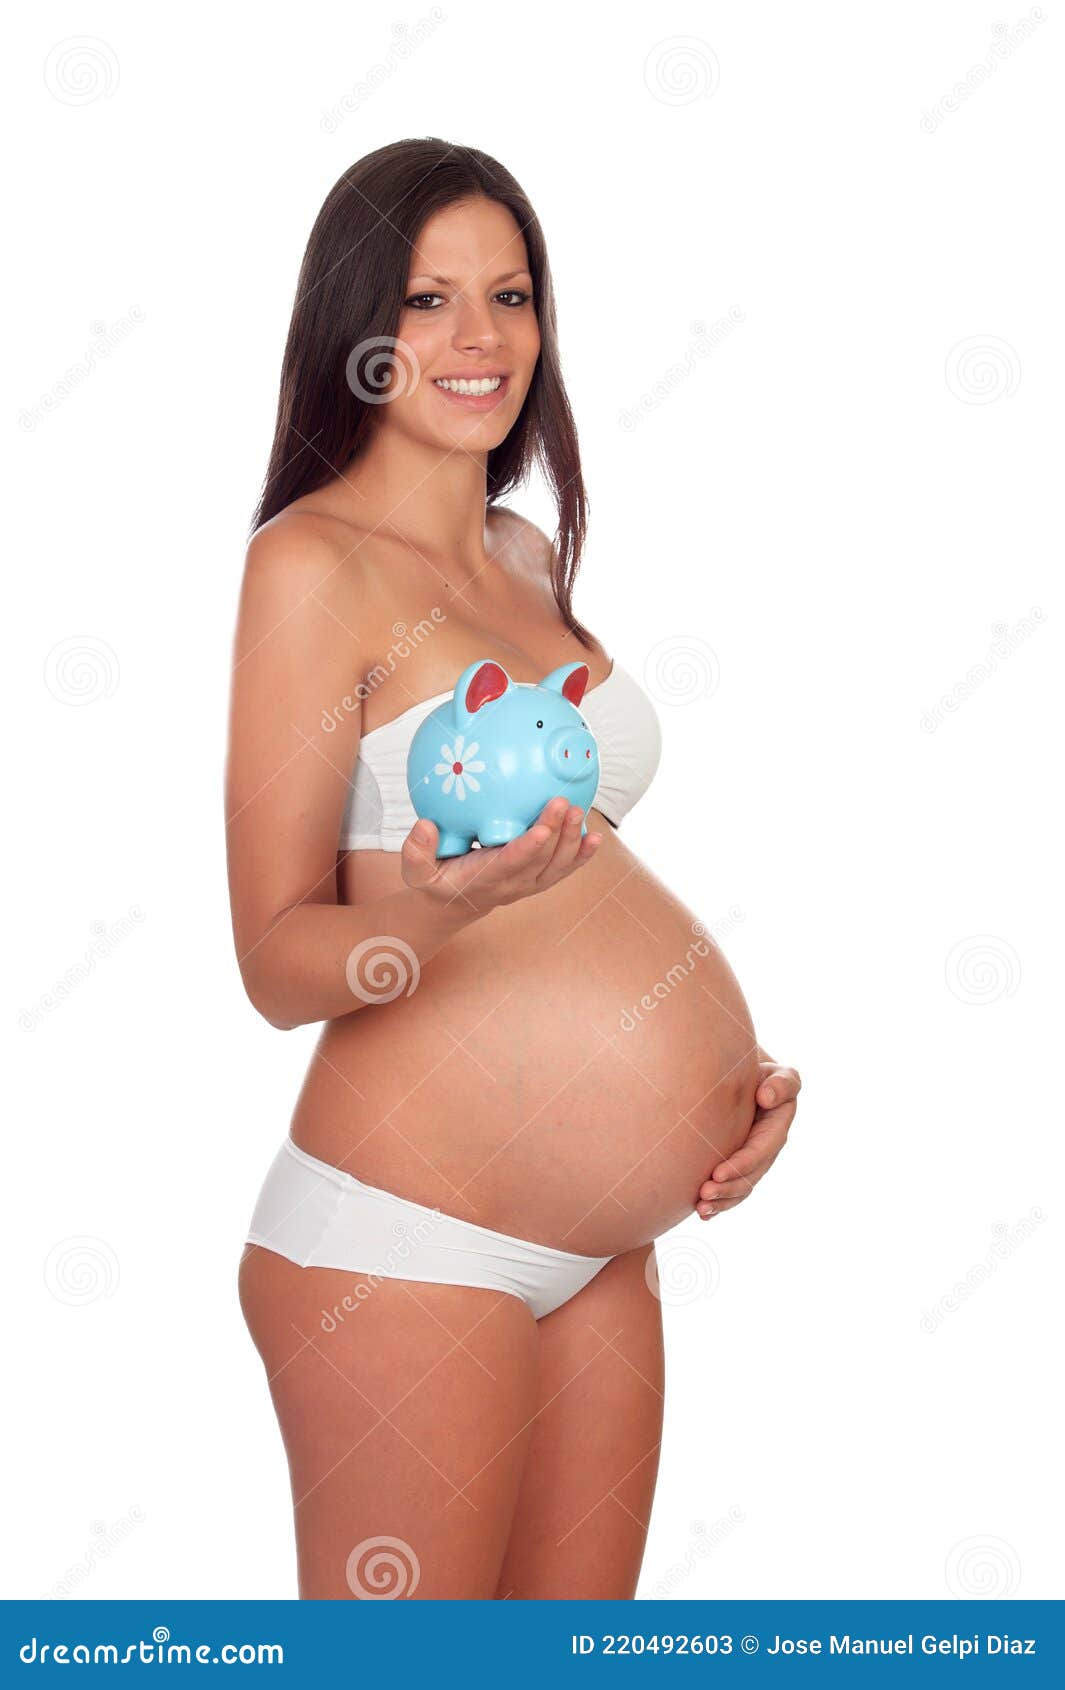 Pregnant woman in underwear covering face with - Stock Photo